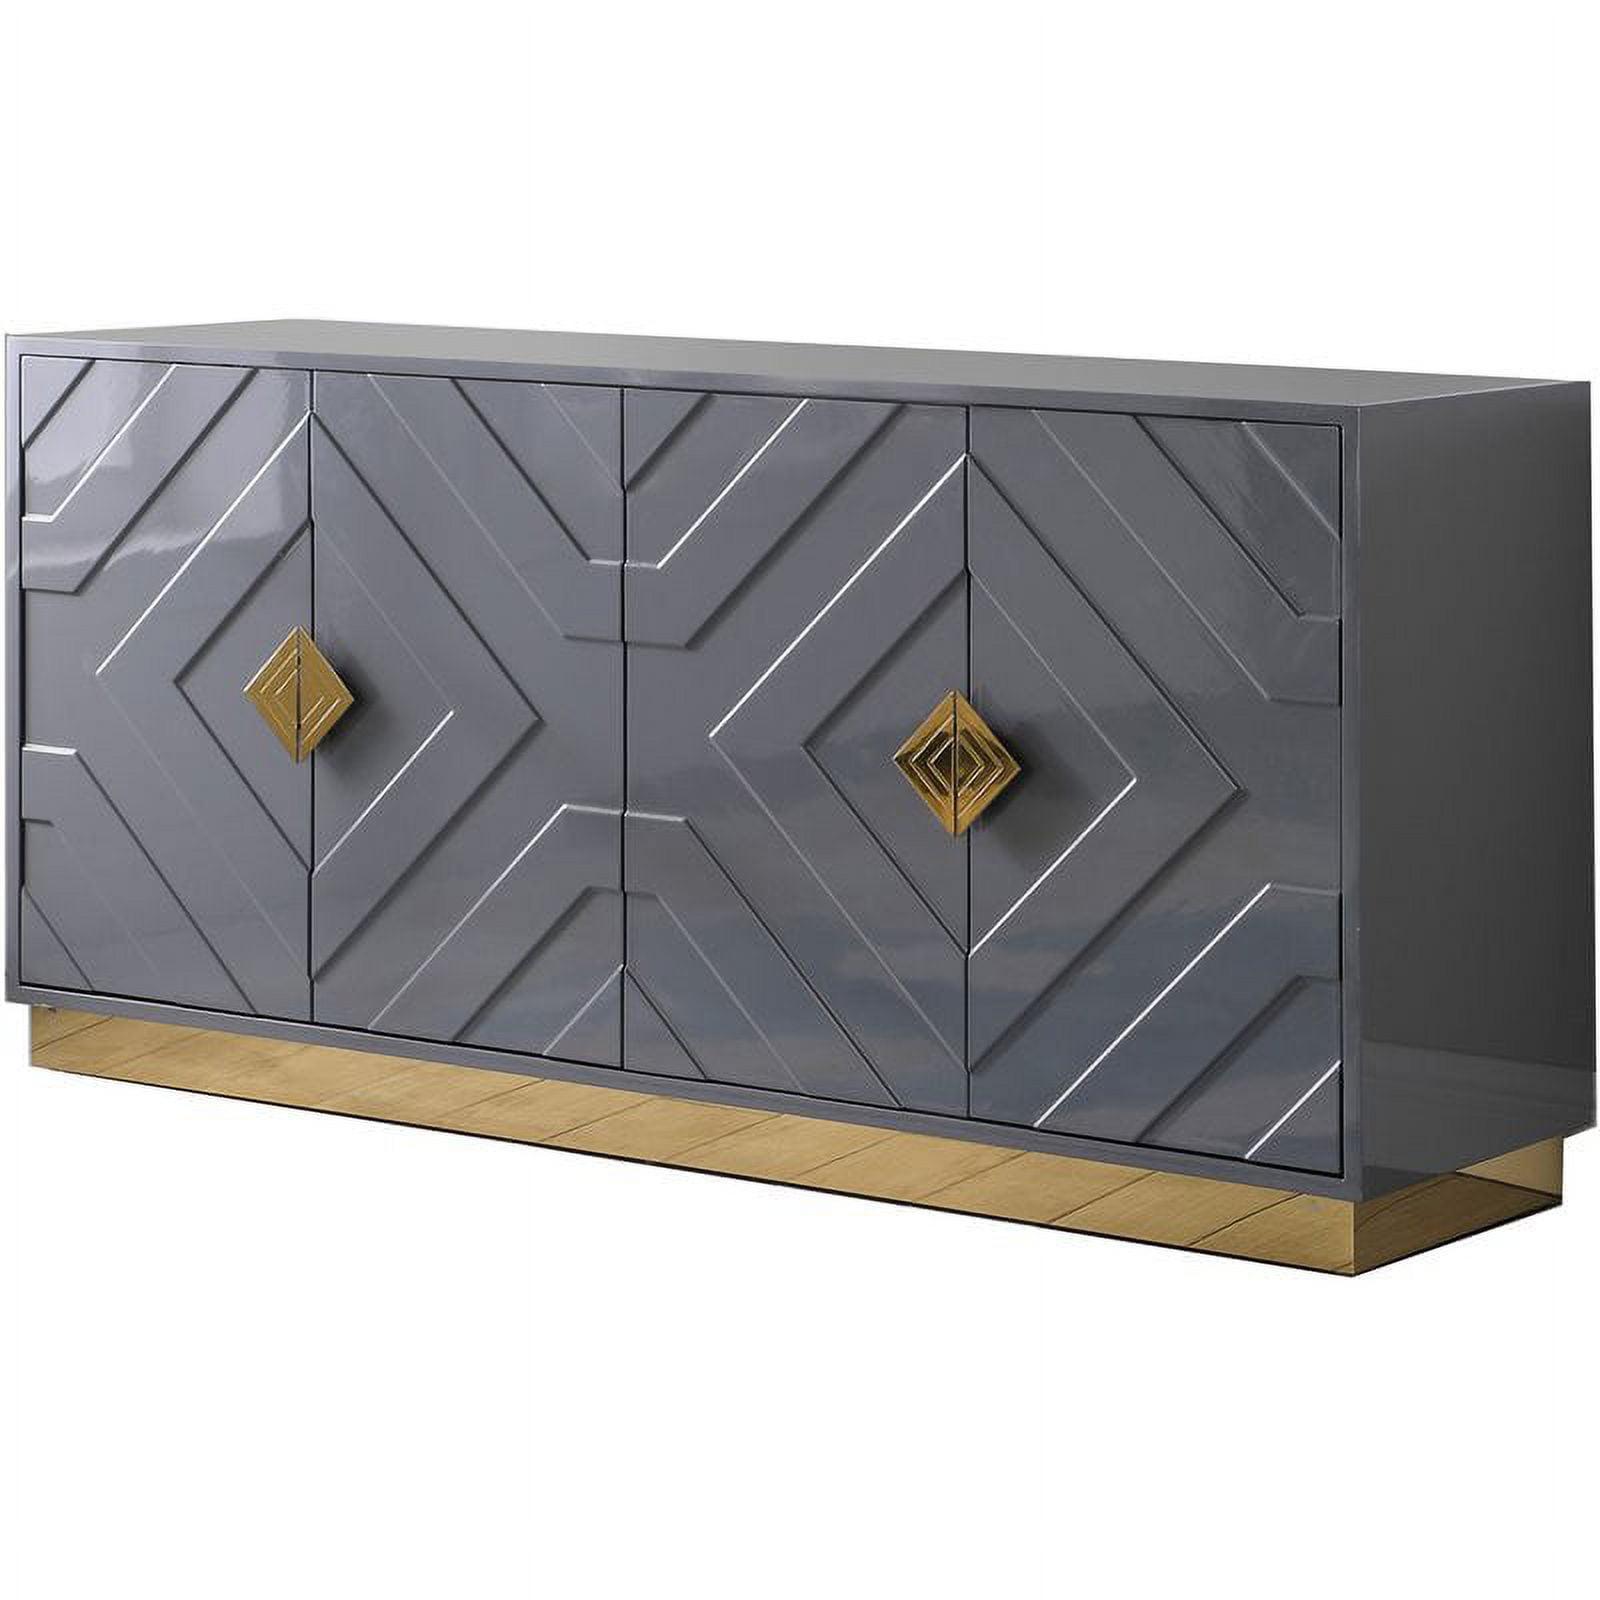 Babatunde 65" Gray Wood Sideboard with Gold Accents